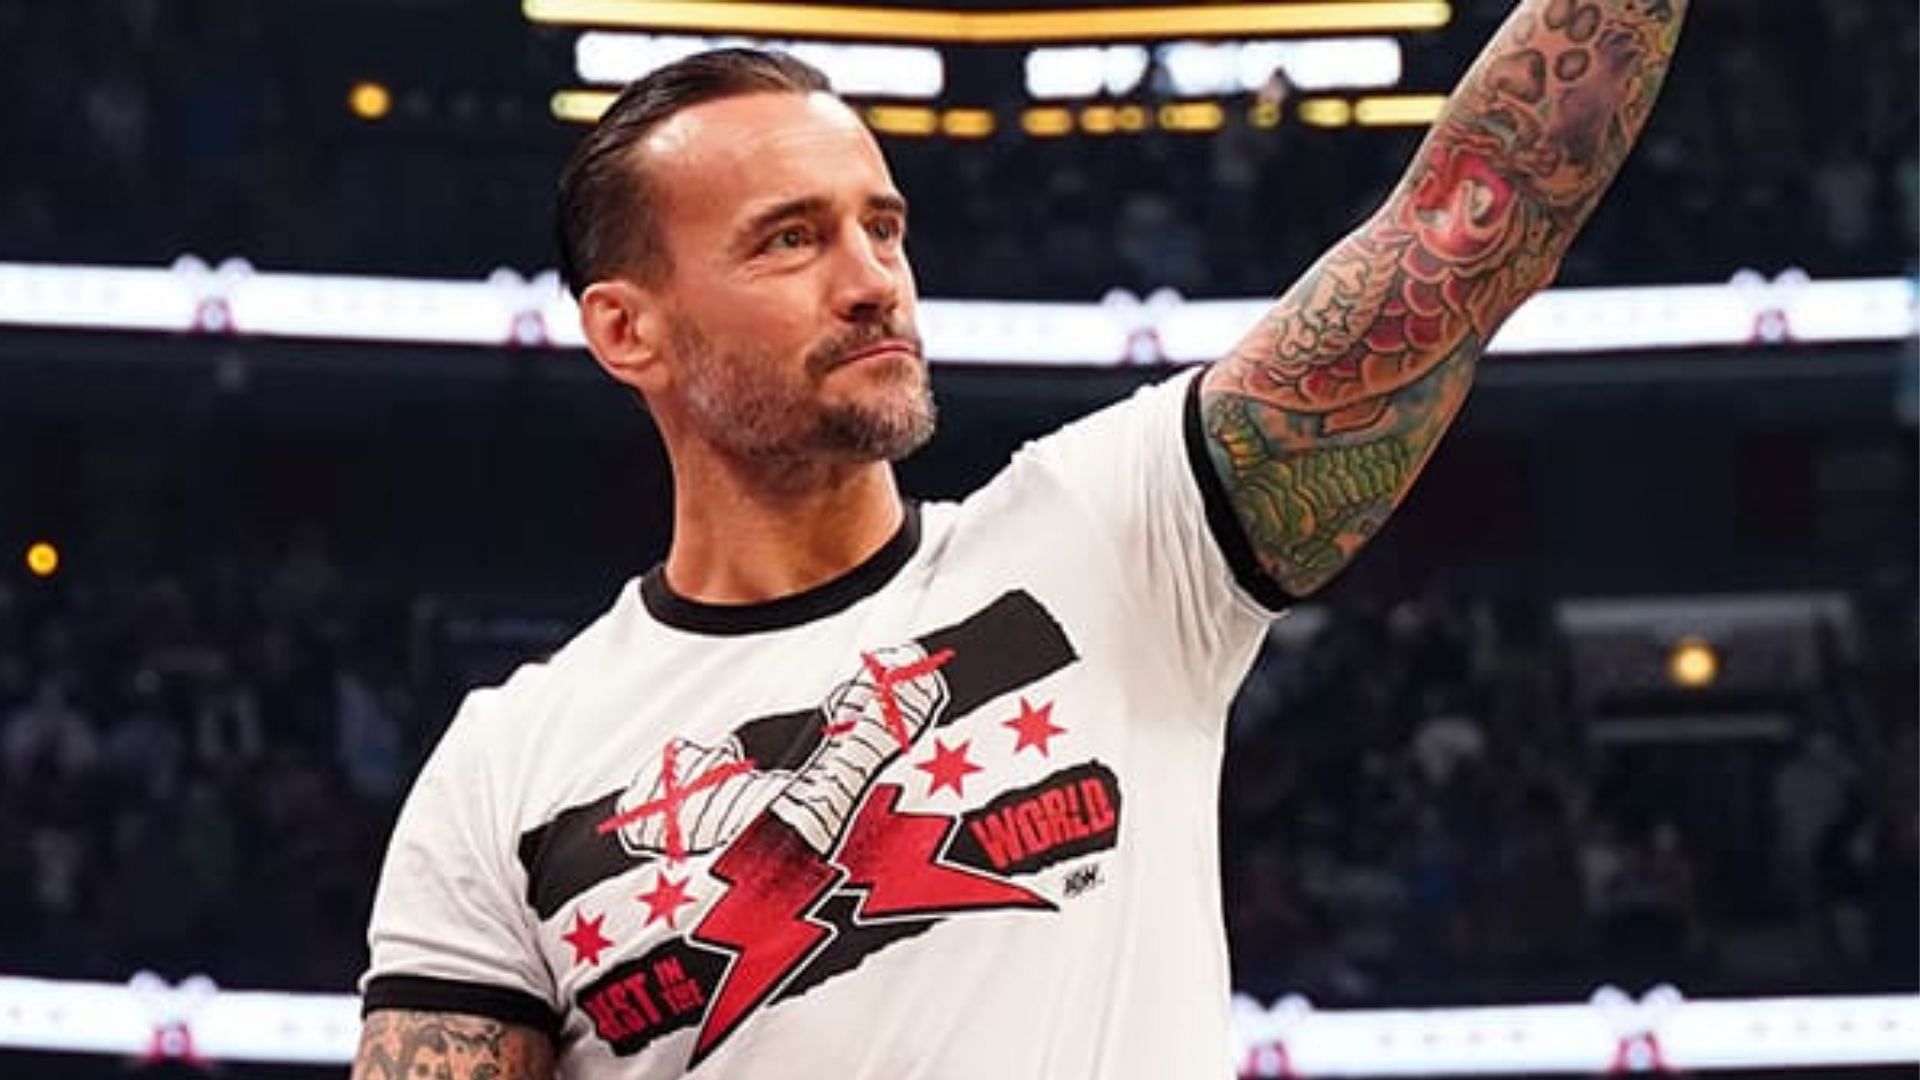 Will fans chant CM Punk at a suspended AEW star?